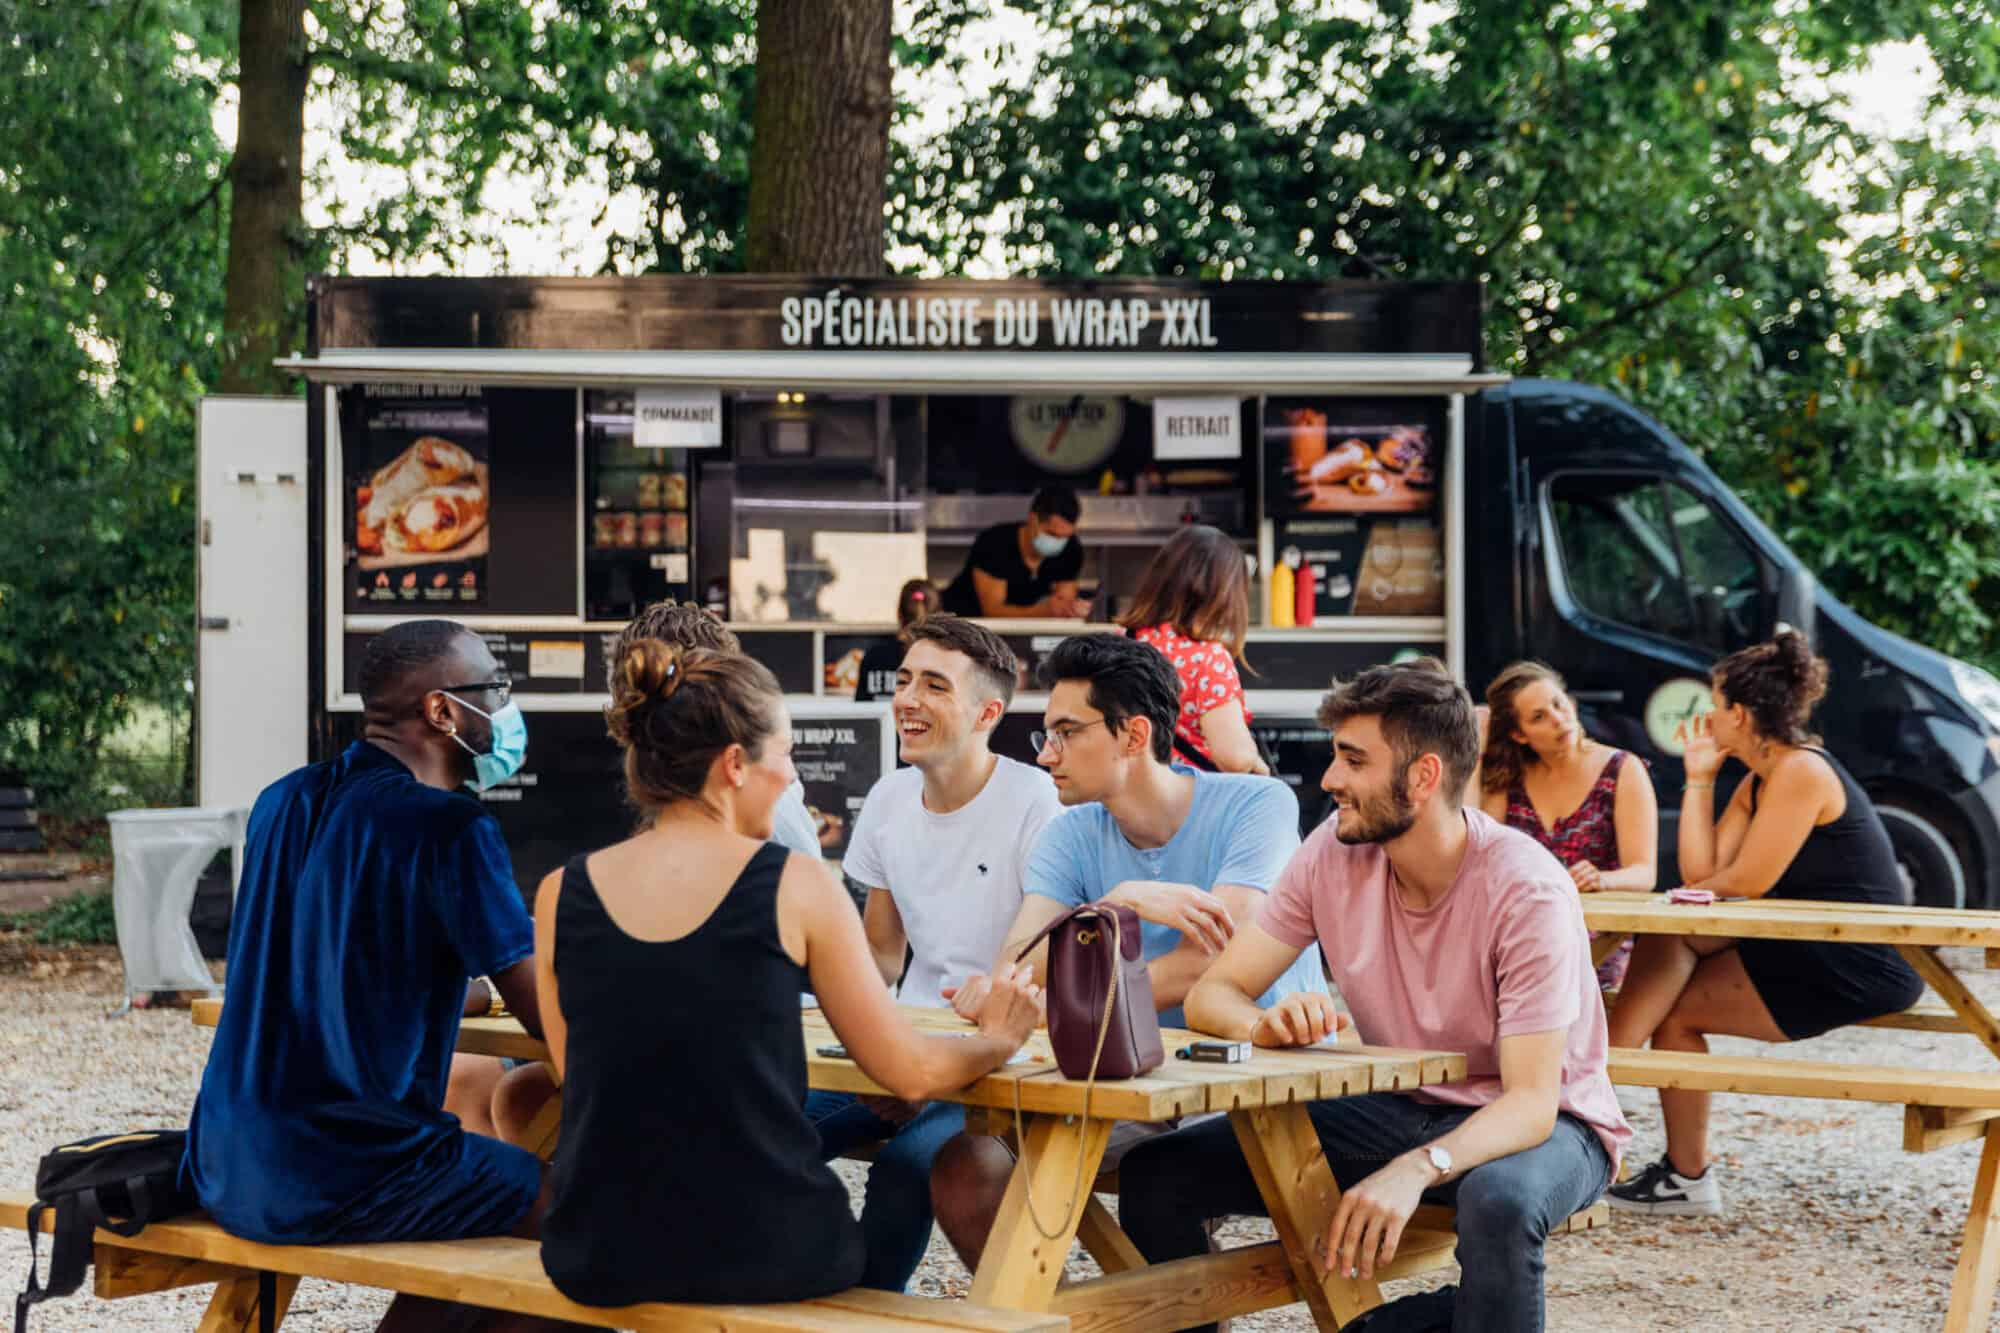 Two groups of people seated at two wooden bench tables in front of a black food truck which has the words 'specialiste du wrap xxl' on it. There is a server in the truck wearing a mask, on his phone. Behind the truck are green trees. 